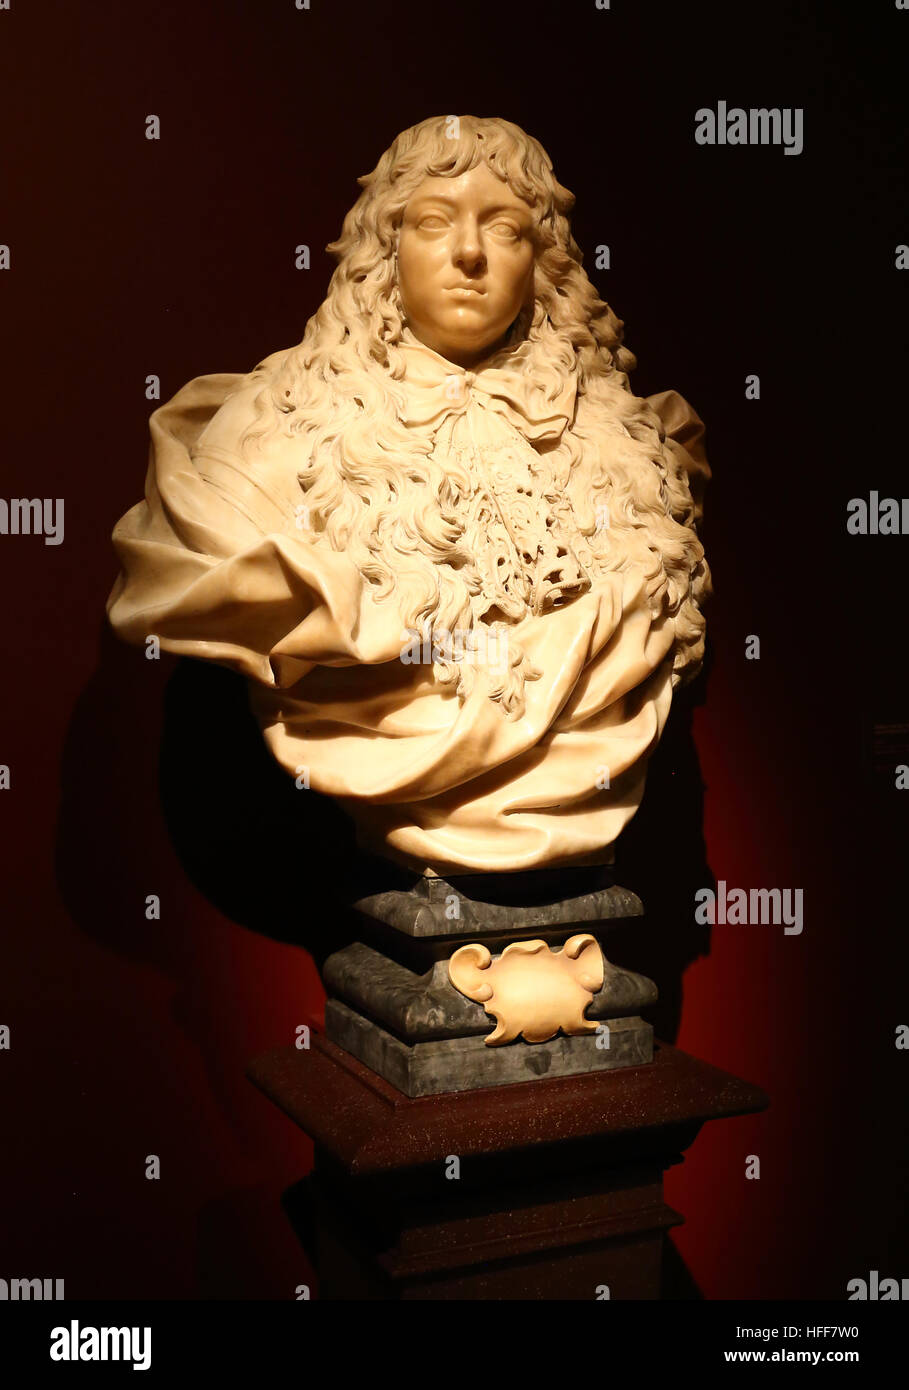 A sculpture on display at the Metropolitan Museum of Art in New York City. Stock Photo